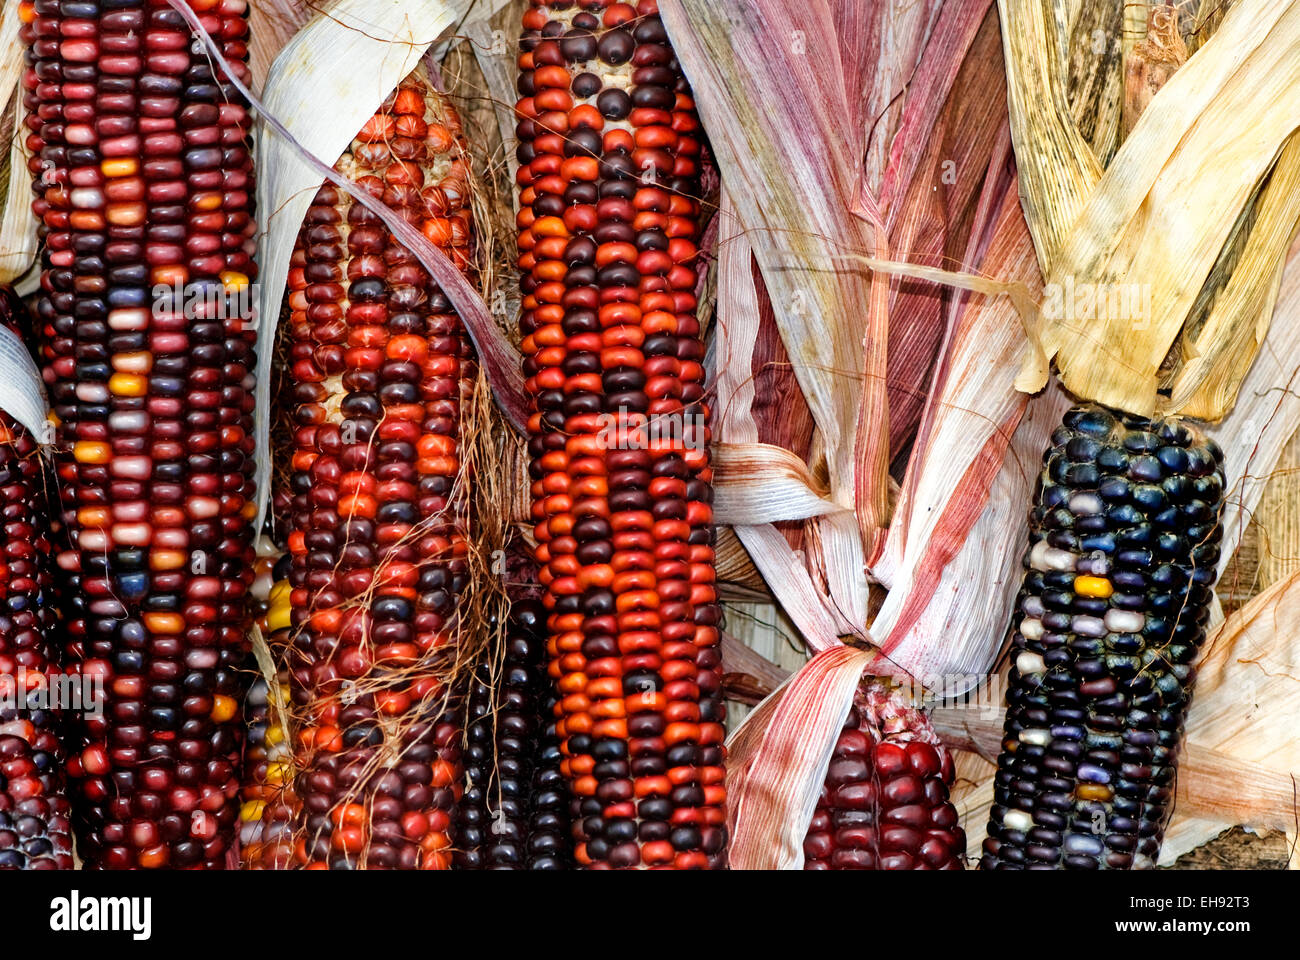 Flint or Indian corn as it is commonly referred to, captured here at a Chicago farmers market. Stock Photo